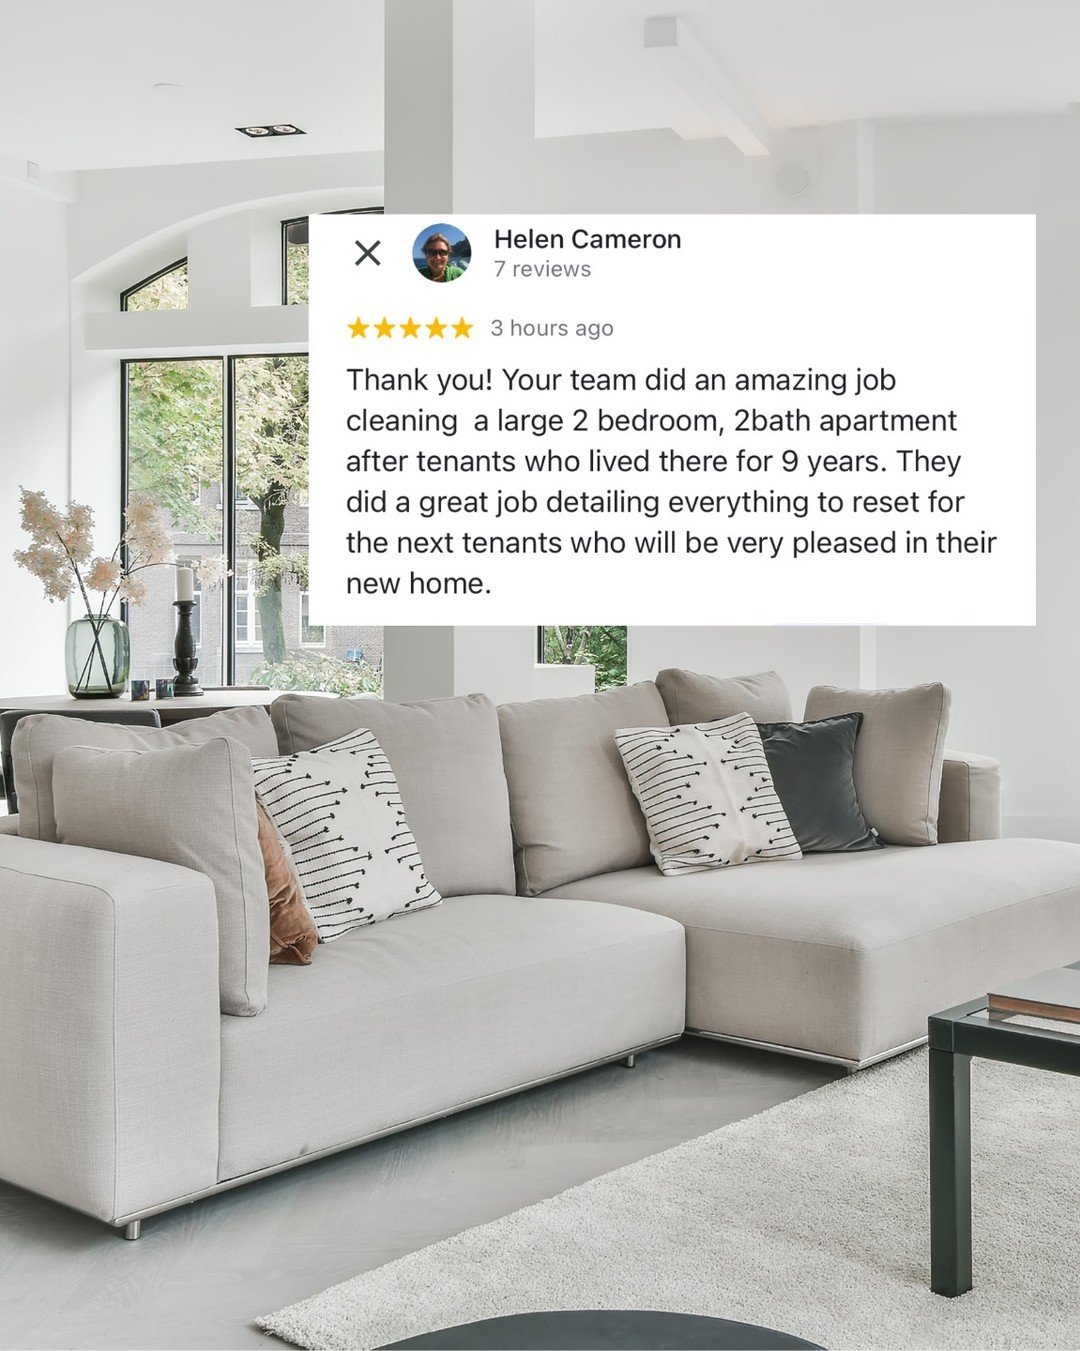 ✨ We love hearing happy customer stories! Thanks to Helen for trusting U HAVE IT MAID with their cleaning needs. Reviews like this keep us motivated to deliver sparkling results every time!

#UHAVEITMAID #TestimonialTuesday #Chicago #OakPark